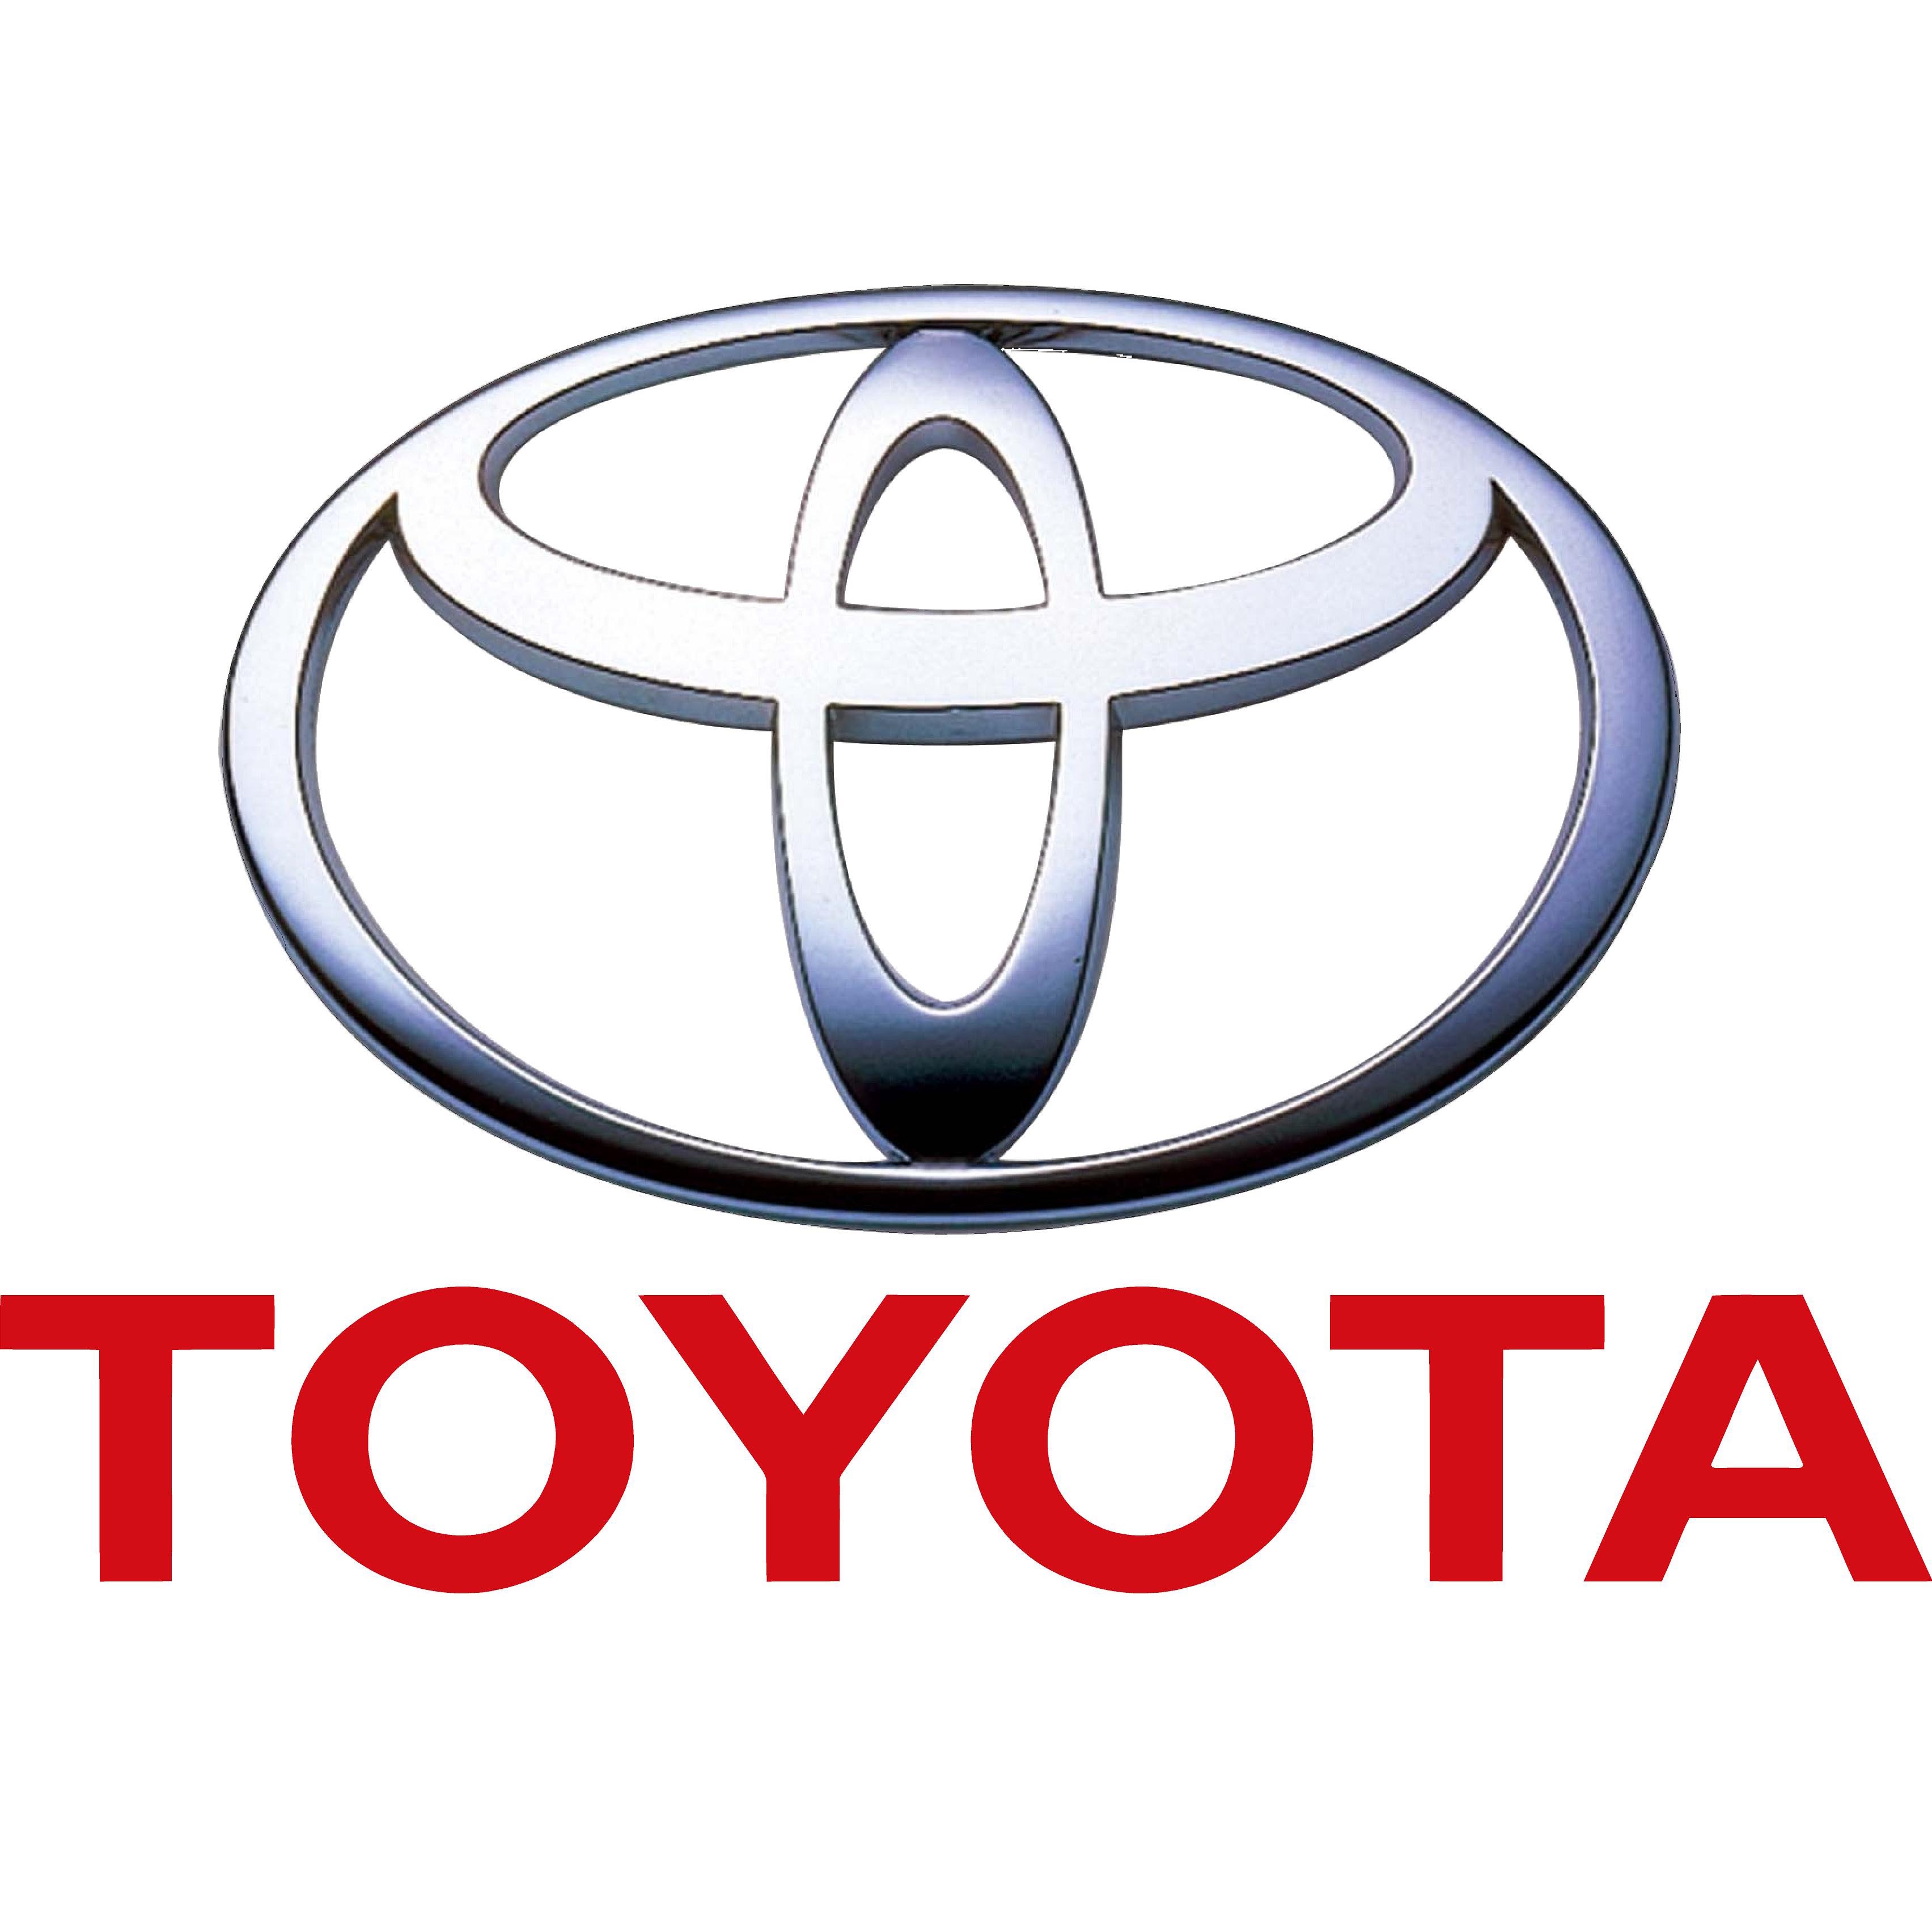 What is the meaning of toyota in japanese